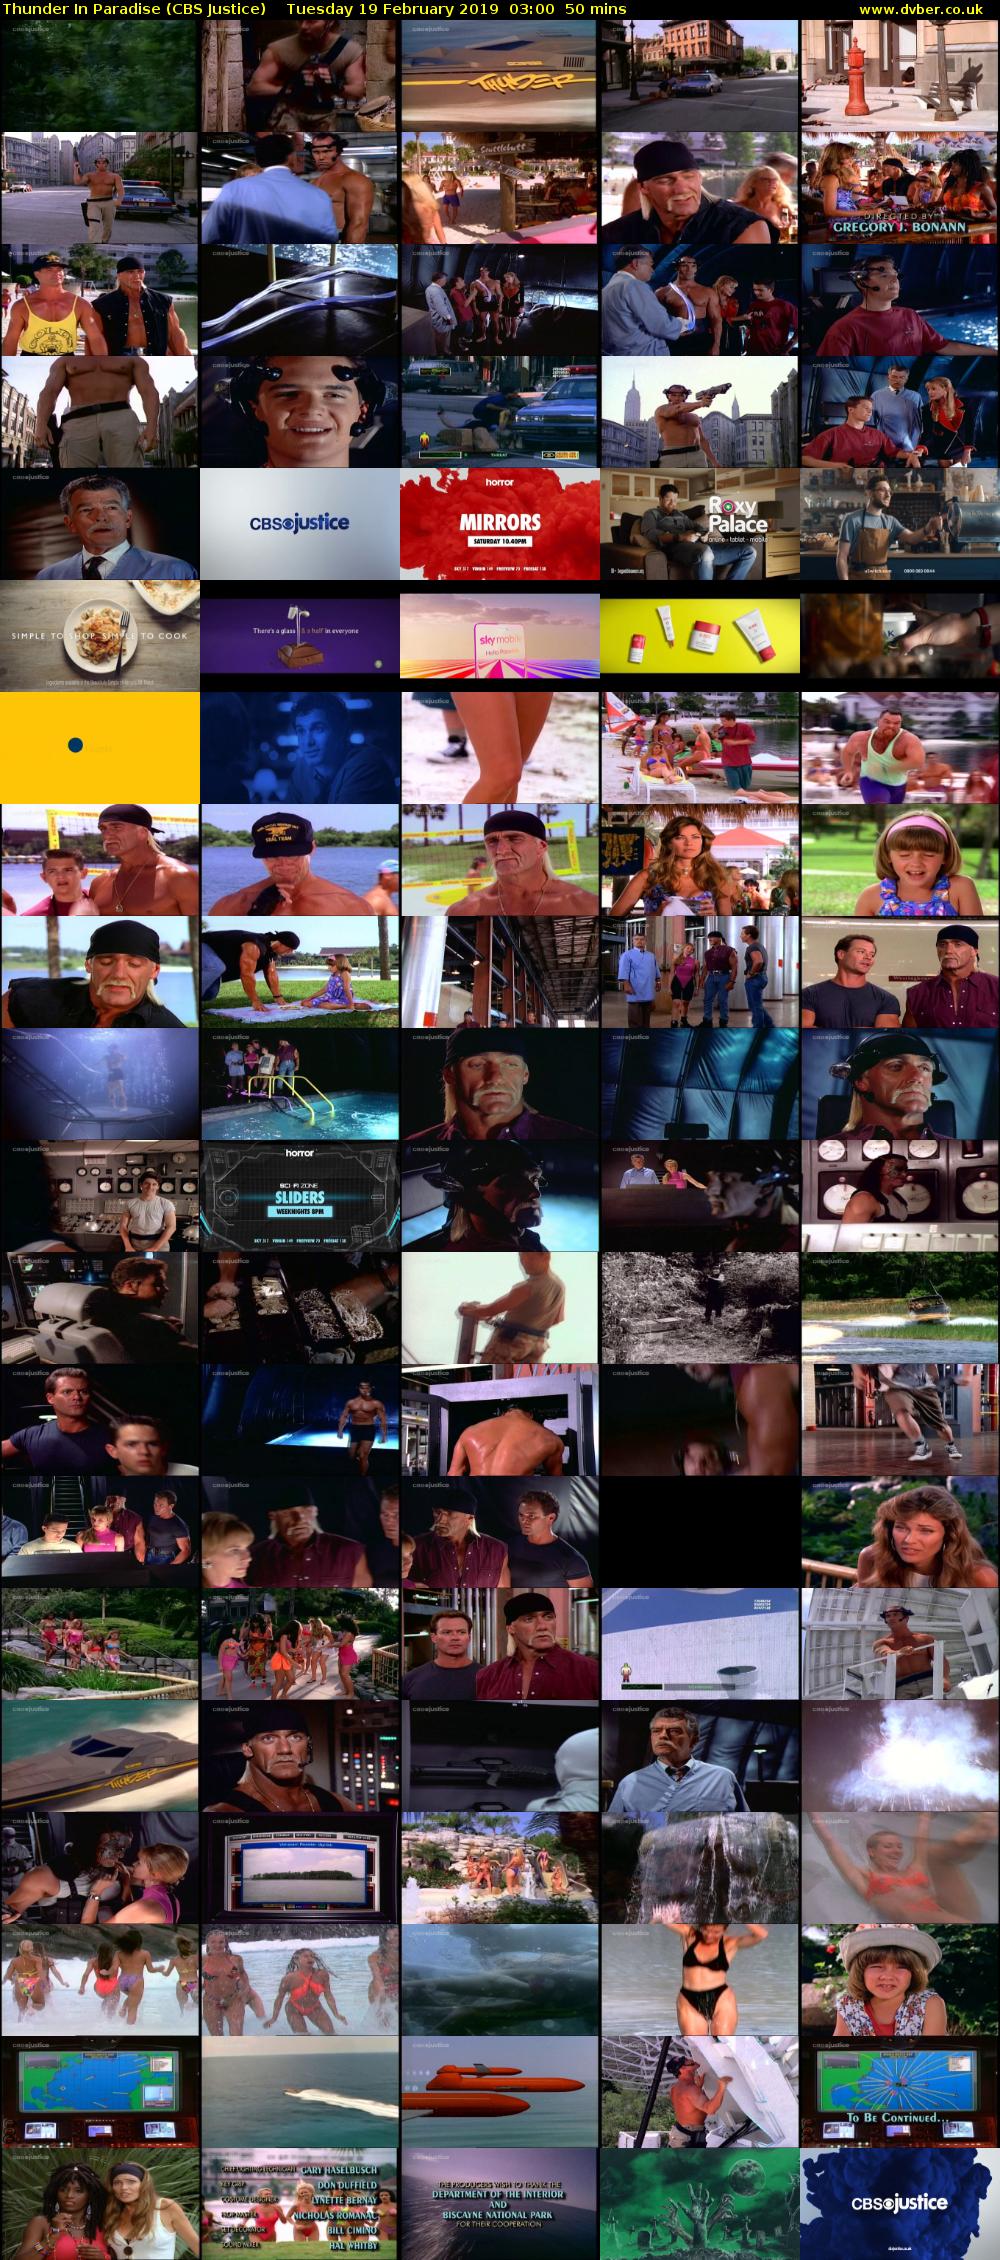 Thunder In Paradise (CBS Justice) Tuesday 19 February 2019 03:00 - 03:50